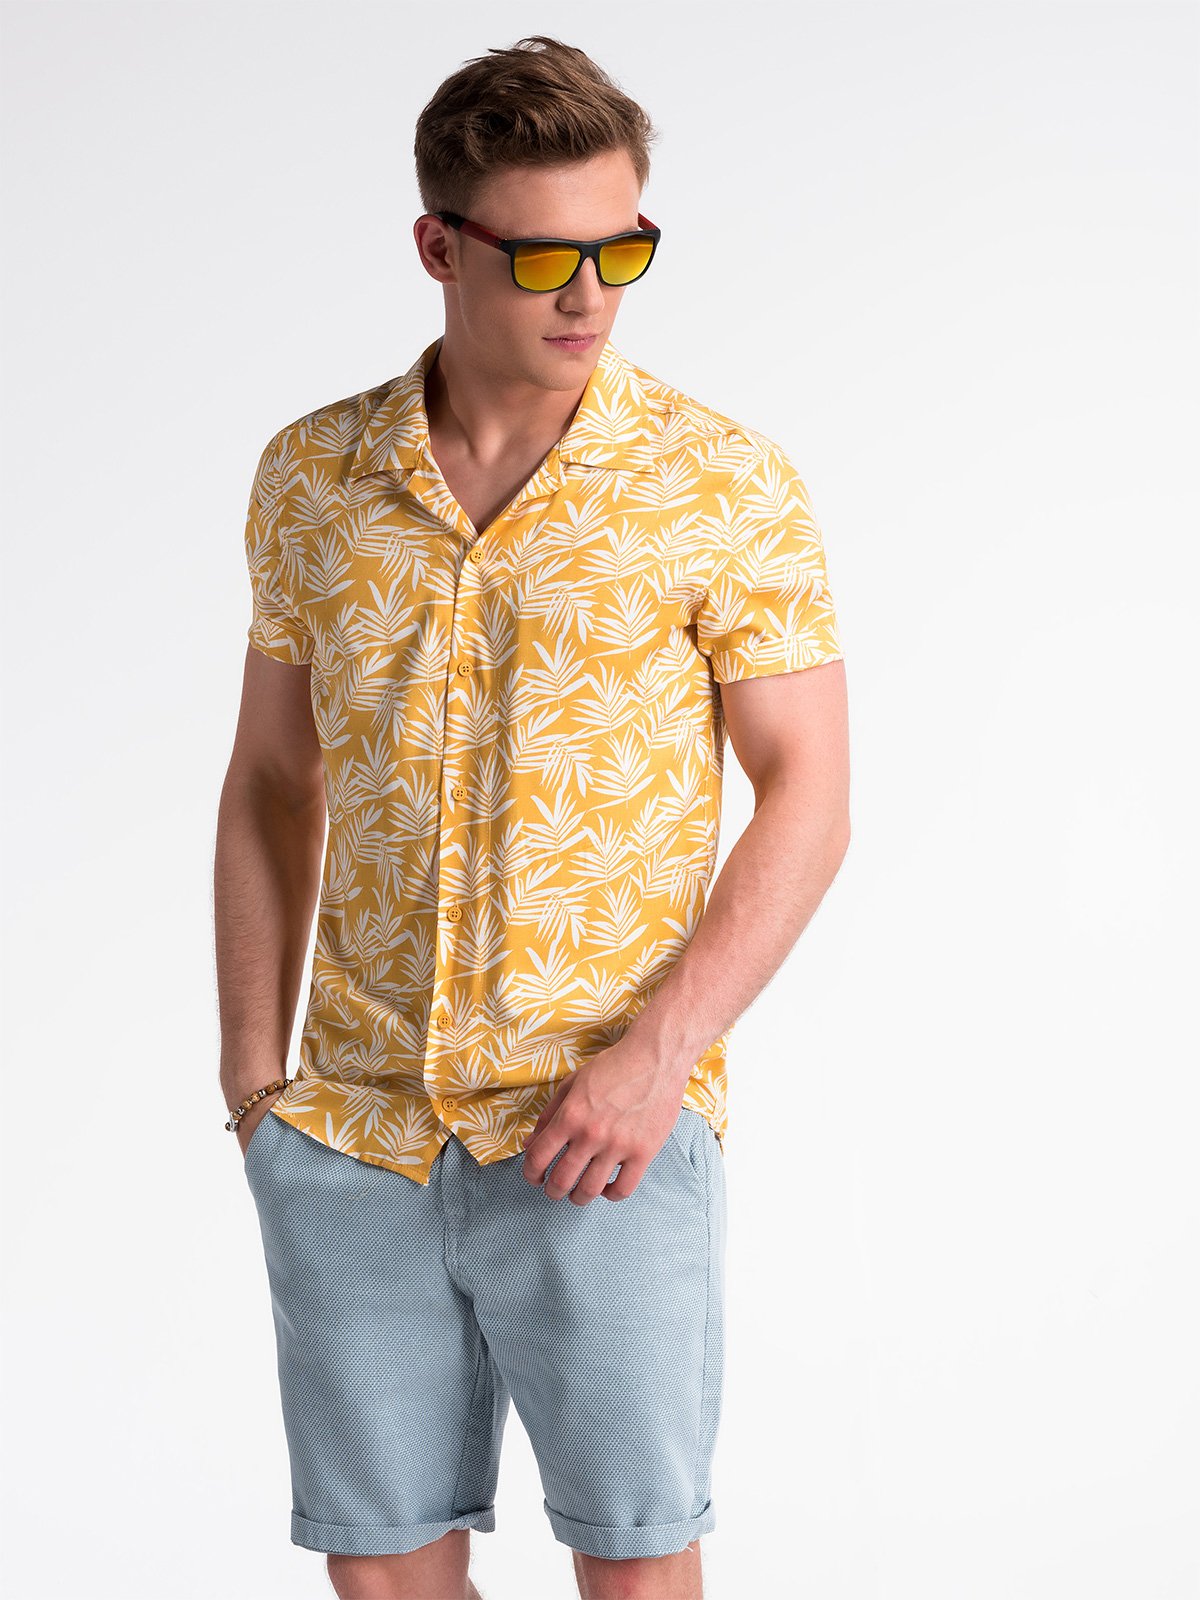 Men's shirt with short sleeves K480 - yellow | MODONE wholesale ...